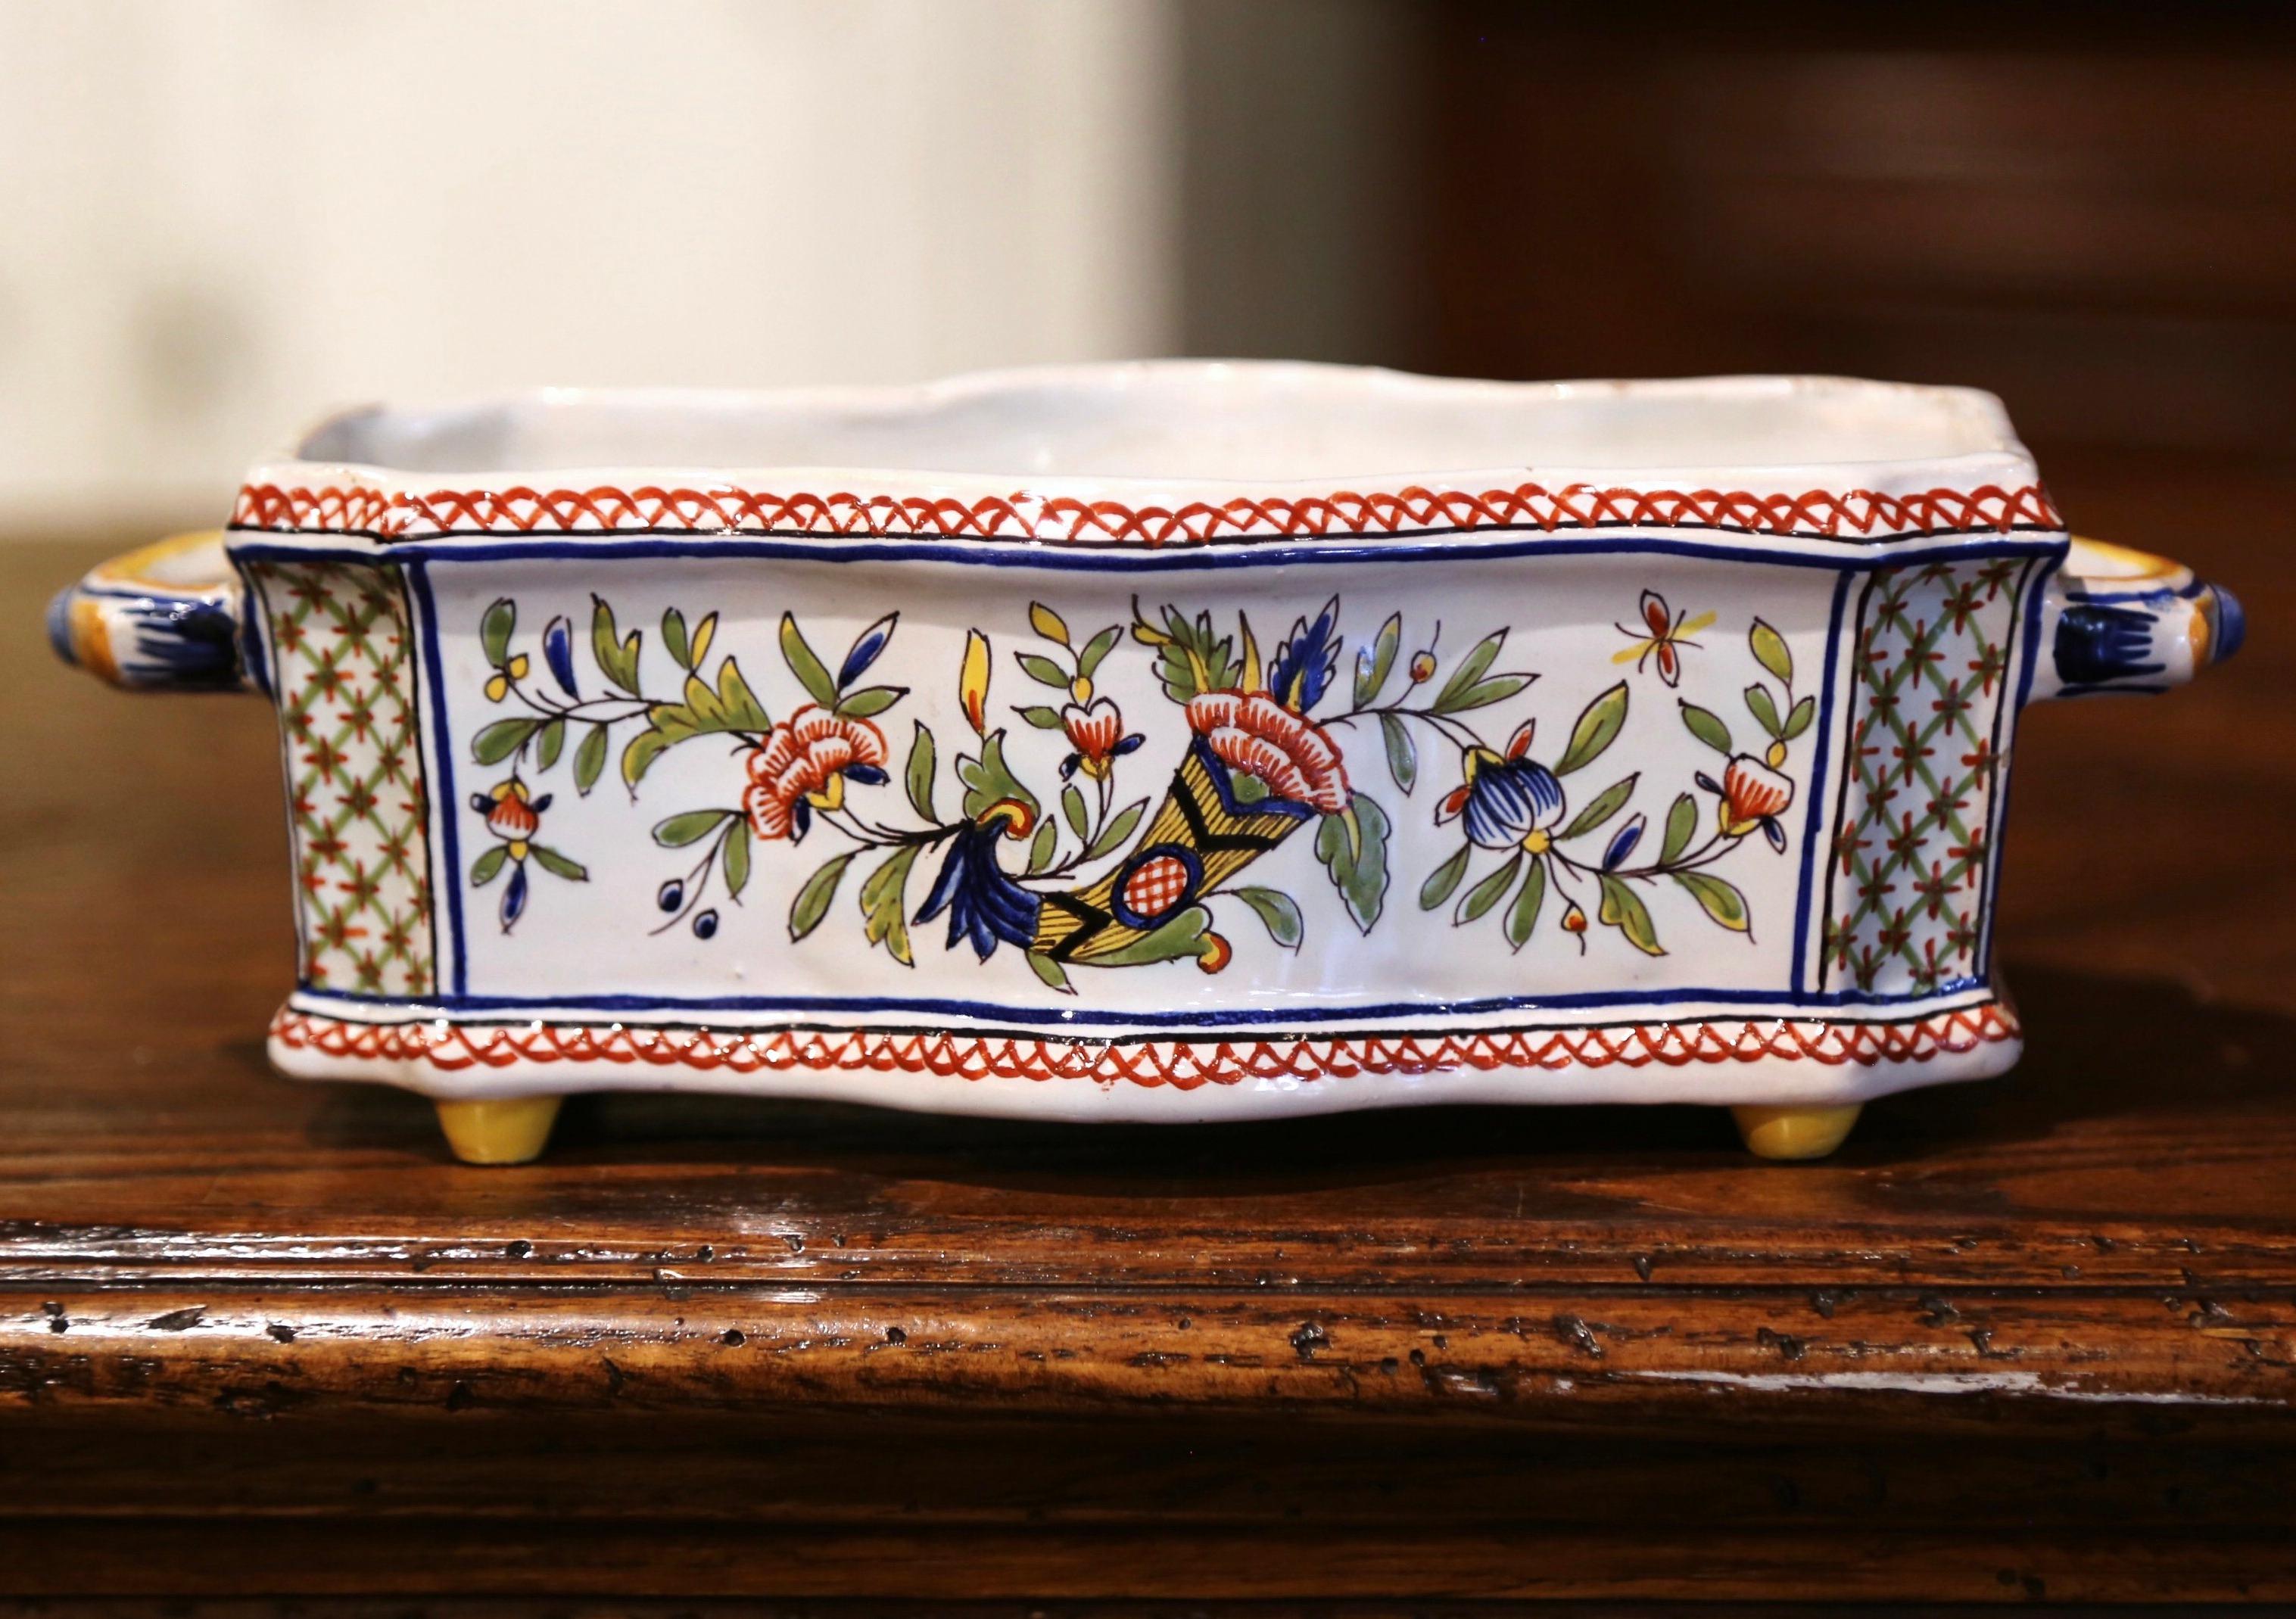 Decorate a mantle, table or buffet with this colorful antique planter. Sculpted in Normandy, France circa 1920, and rectangular in shape, the ceramic jardiniere stands on small feet and is dressed with side handles; it features a playful bombe and